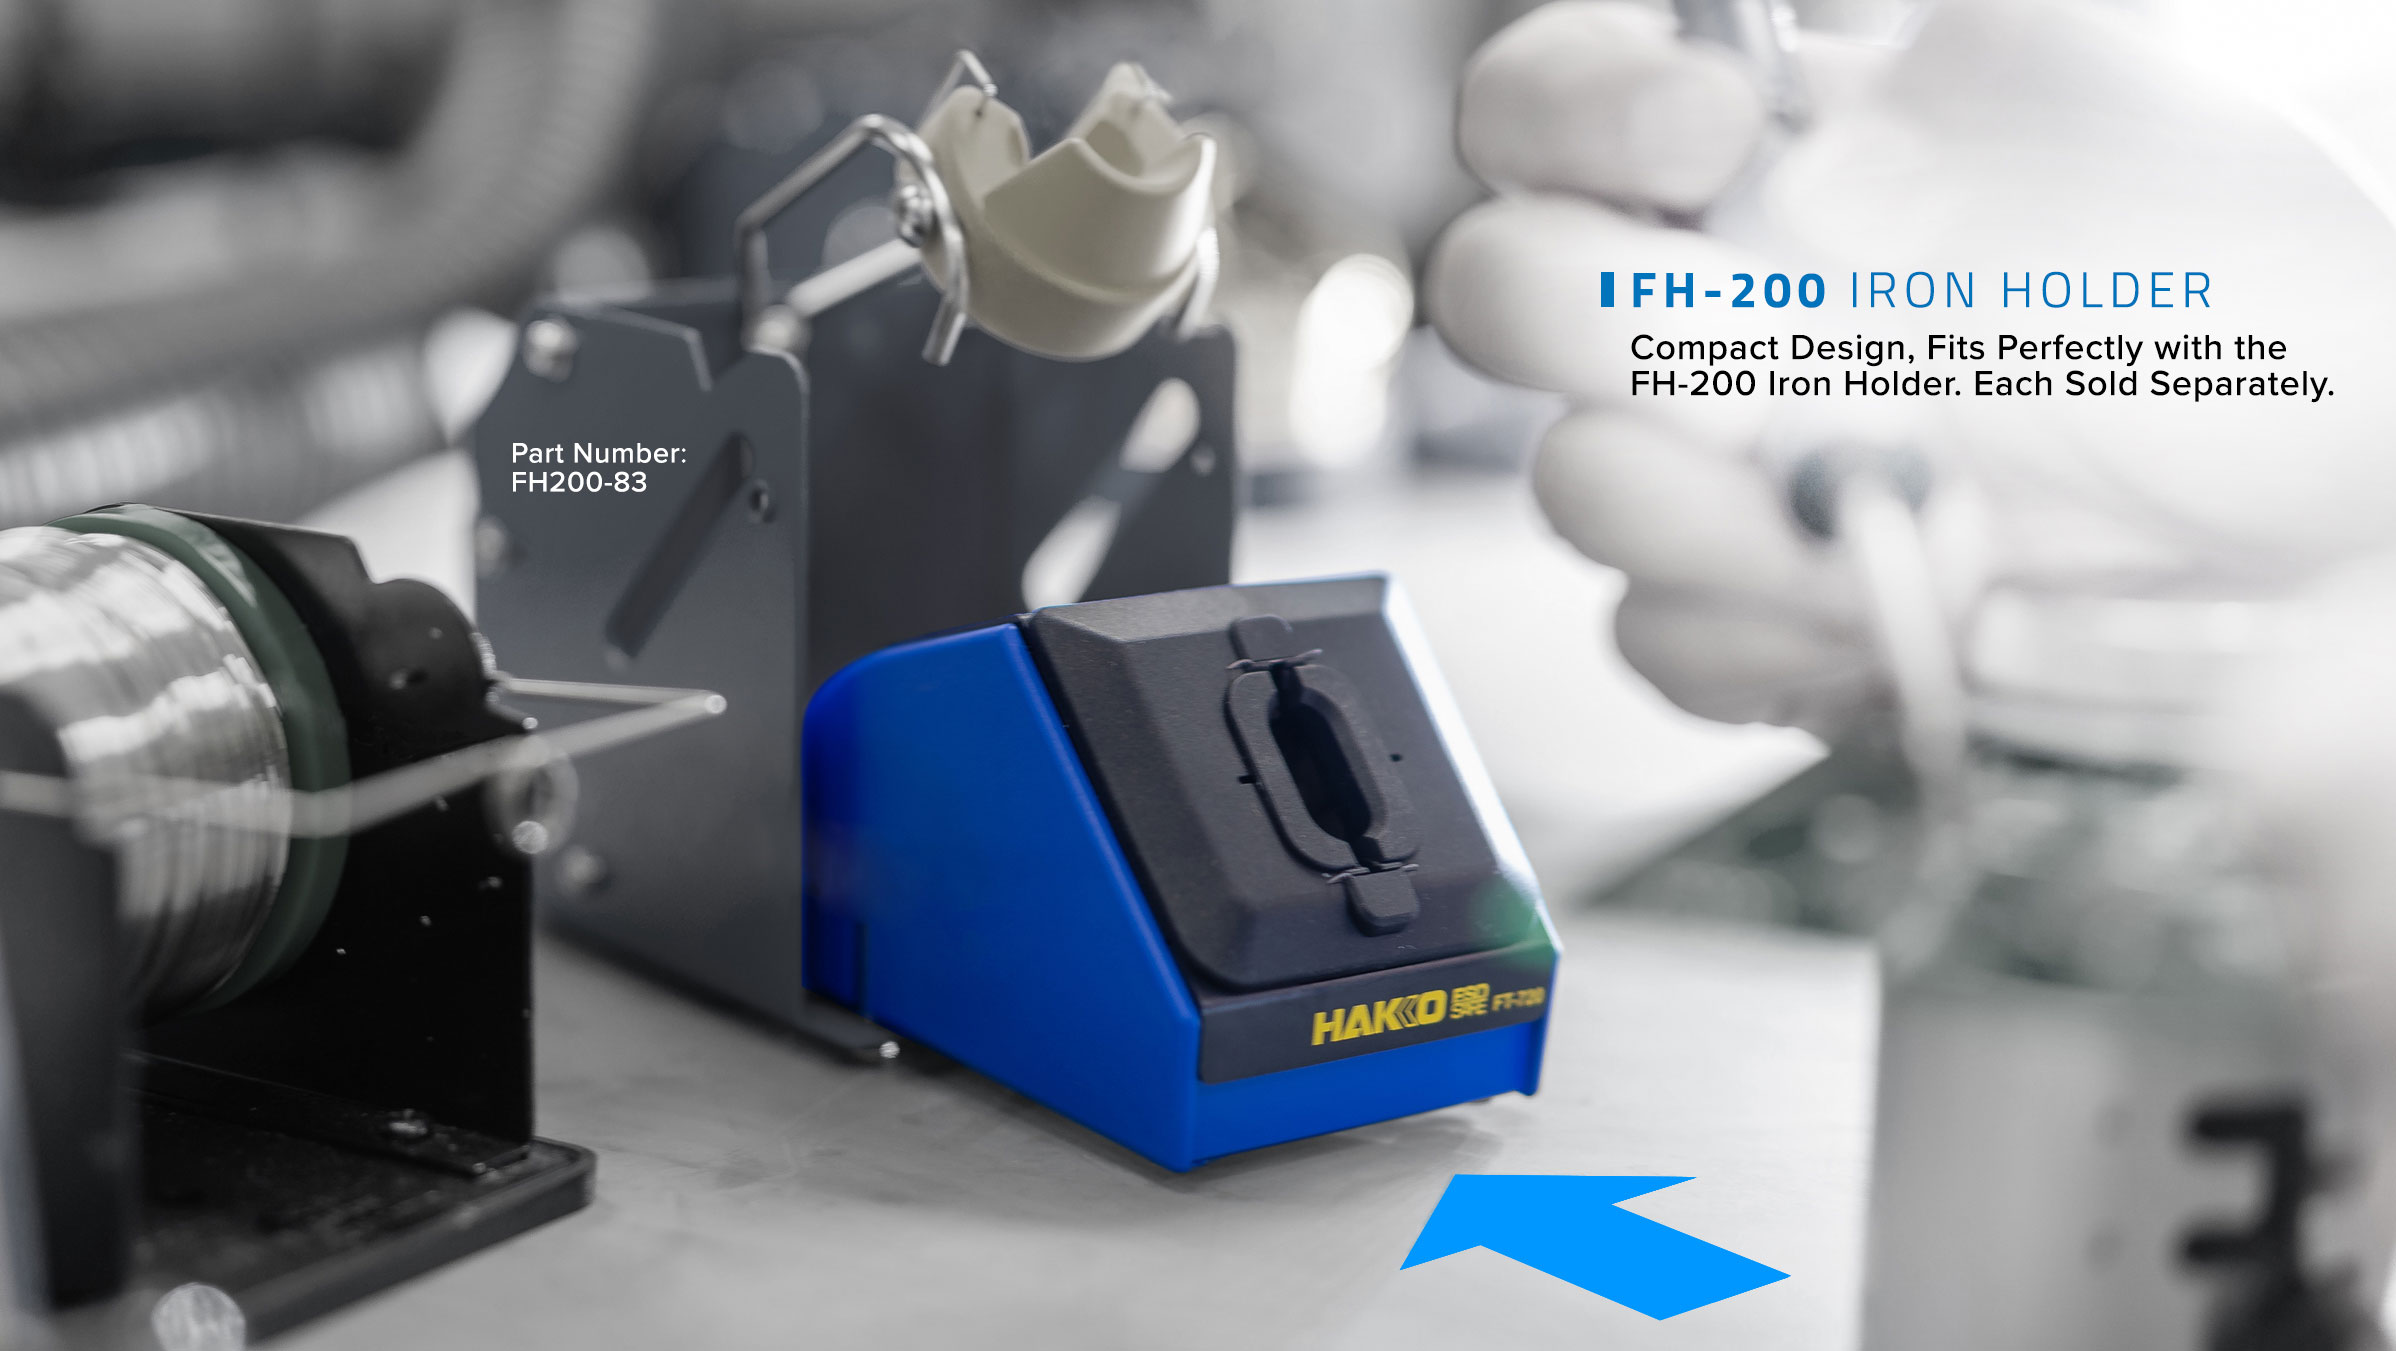 Hakko FT-710 and FT-720 can be mounted to the FH-200 Iron Holder. Sold separately.